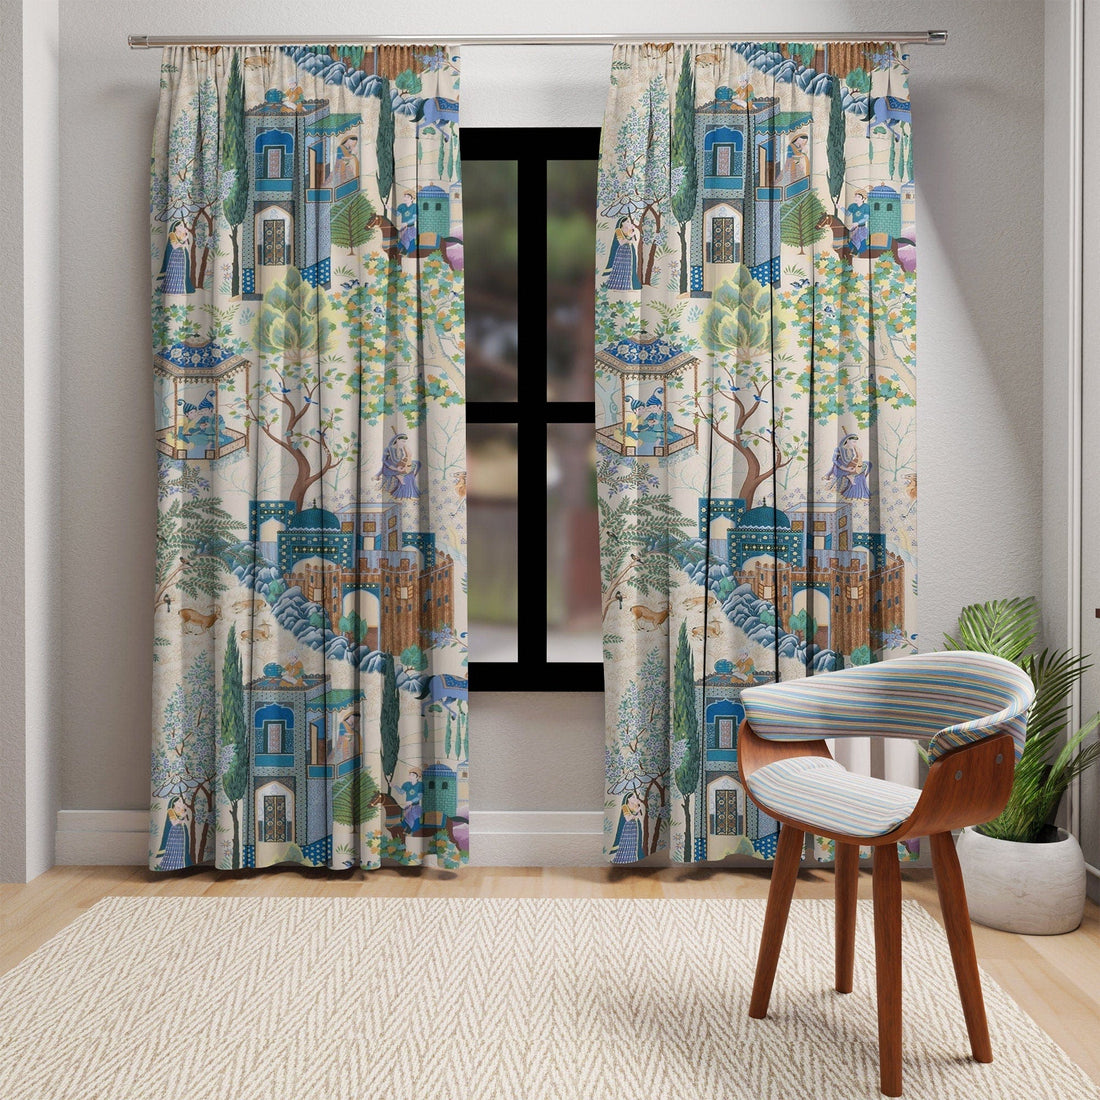 Kate McEnroe New York Vintage French Toile De Jouy Window Curtains with Traditional Asian Country Scene, Rustic Chic Blue, Green Floral Print Window CoveringsWindow CurtainsW3D - FRE - CHI - SH2